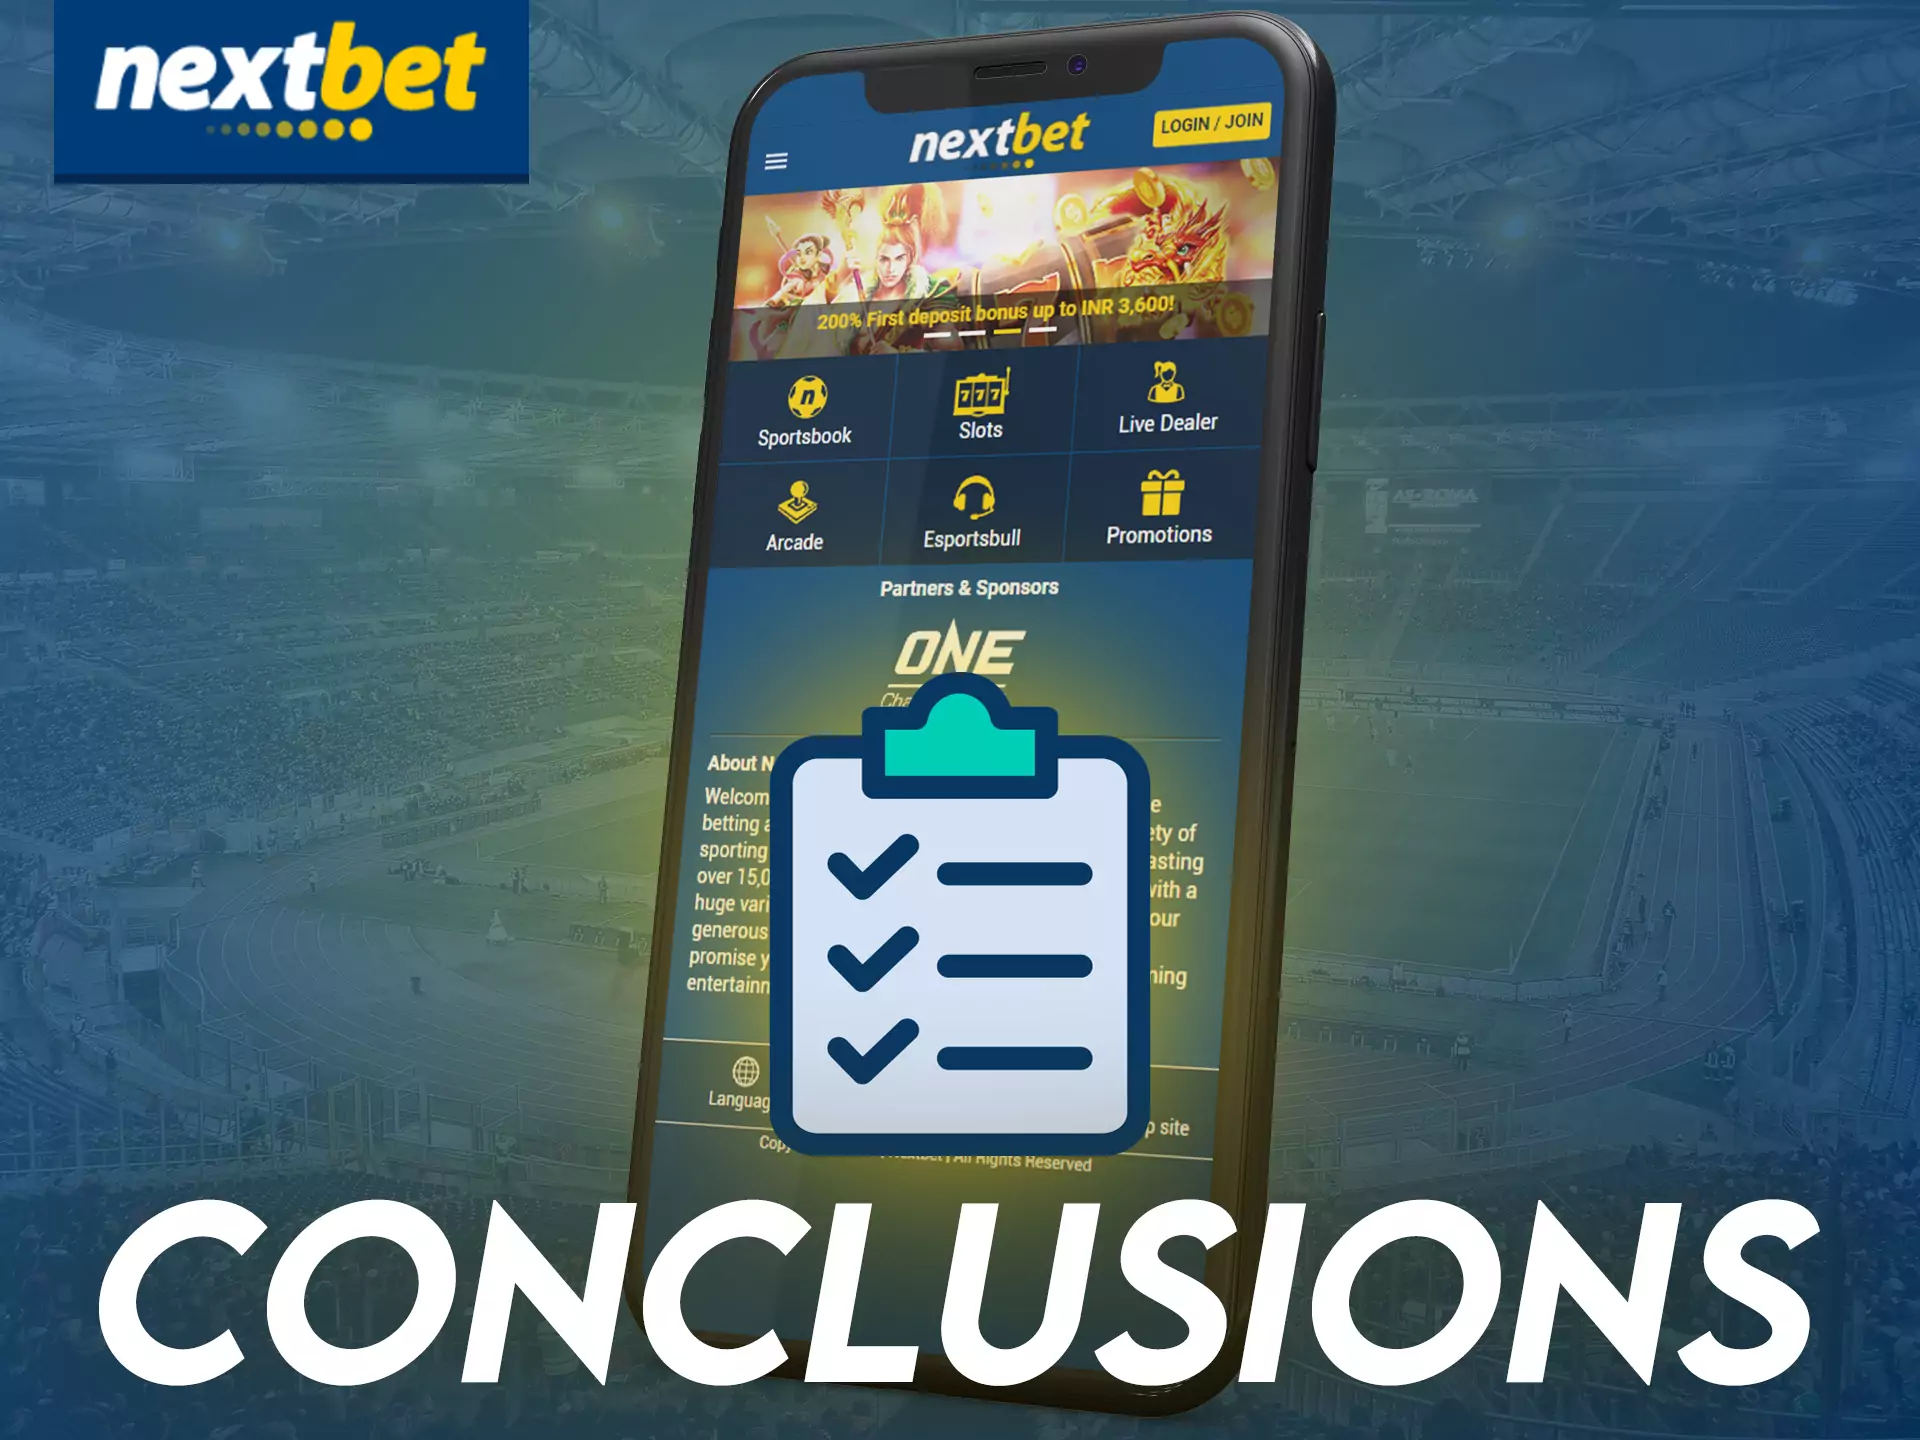 In the Nextbet app, you can place bets, play at the casino, and receive favorable bonuses.